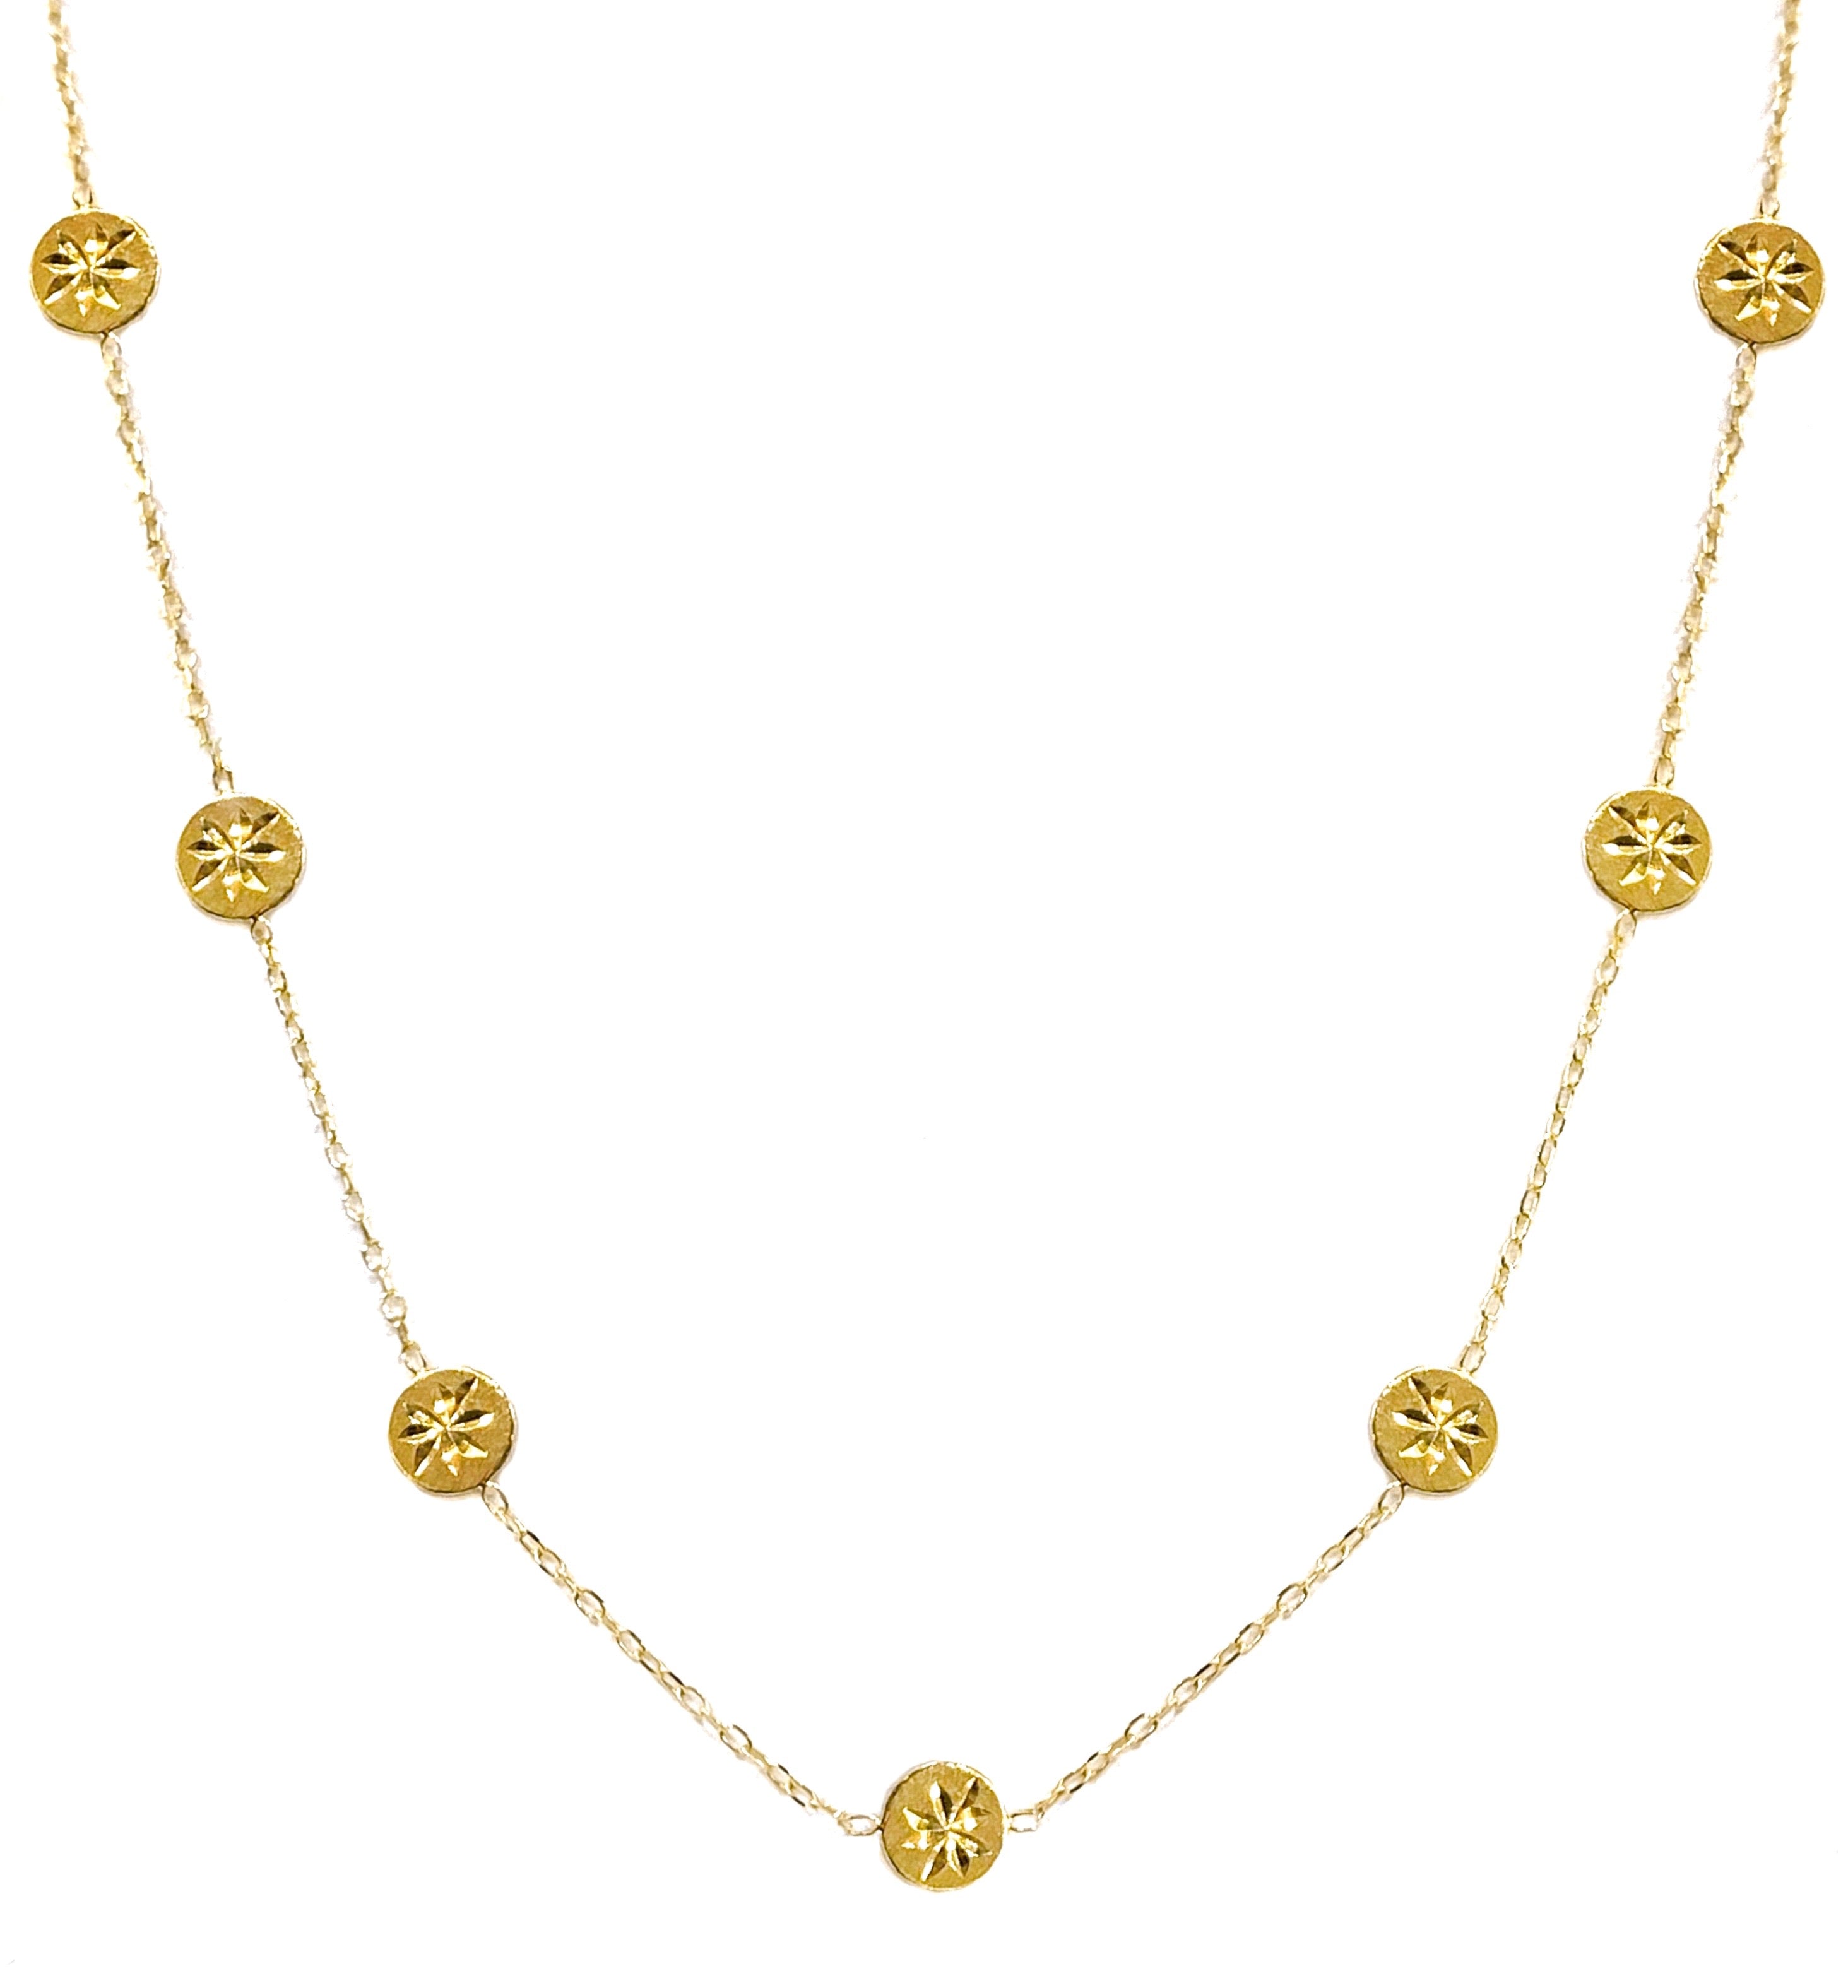 14K YELLOW GOLD STARBURSTS BY THE YARD NECKLACE